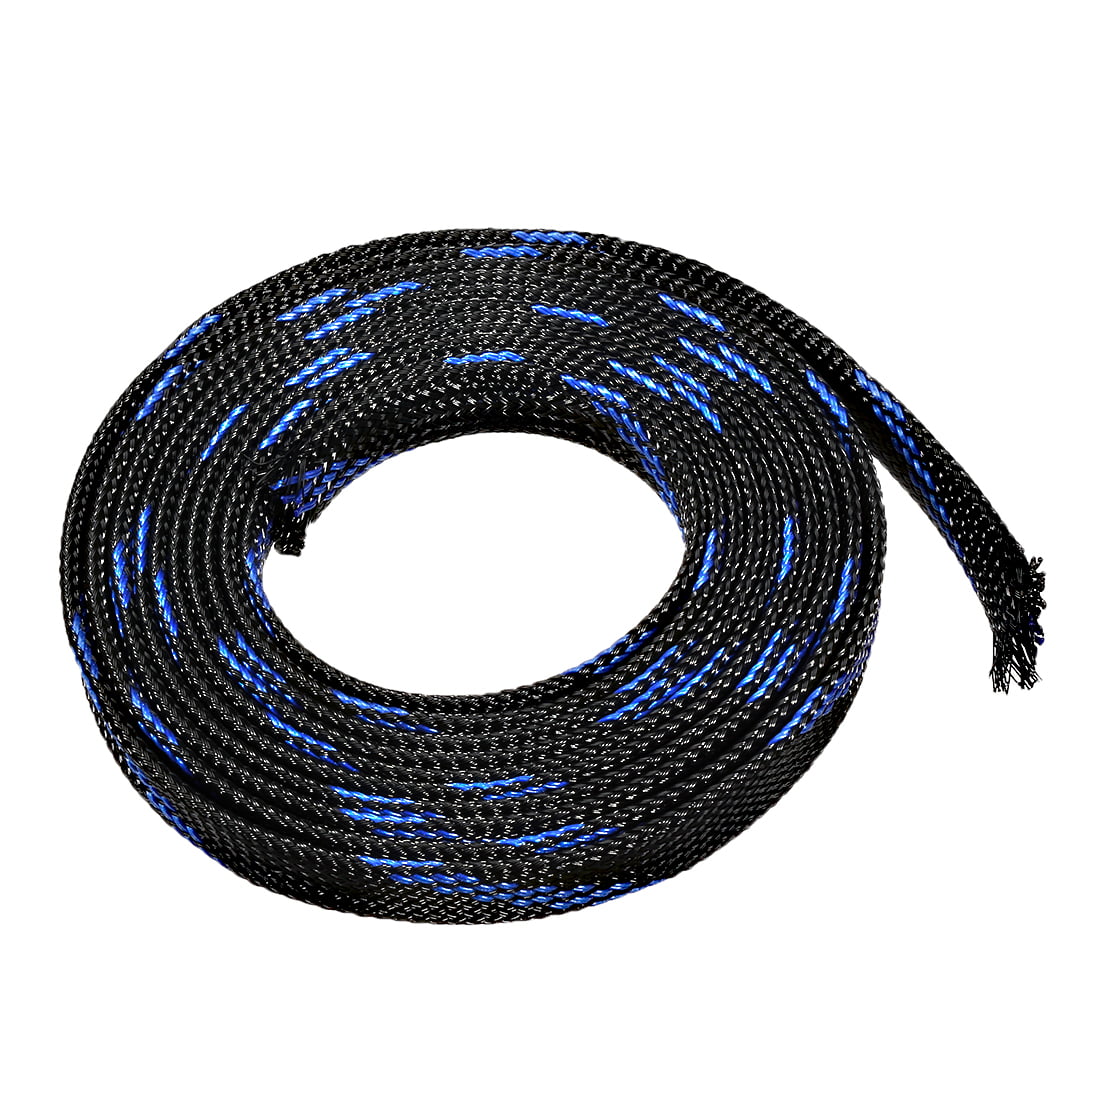 POLYESTER 6mm BRAIDED SLEEVING EXPANDABLE BLACK BRAIDED FLEXIBLE CABLE SLEEVING 2 Meters